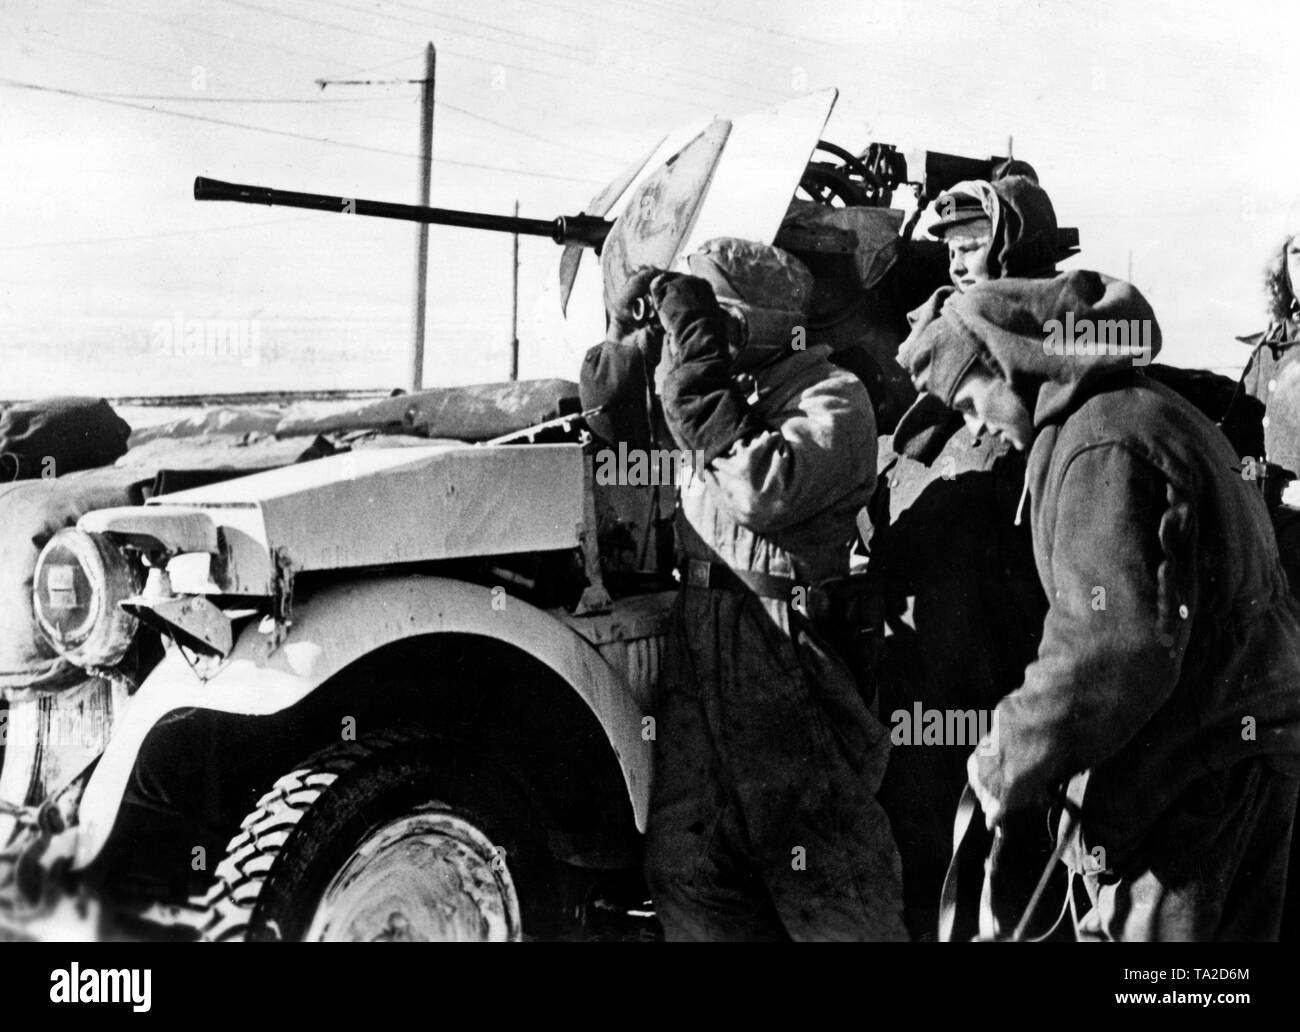 A Schuetzenpanzerwagen (special motorized vehicle) Sd.Kfz.10/5 with a flak is used for defense against enemy tanks during the winter defensive battles at the Don. This special vehicle was a refitted half-track vehicle with a built 2-cm Flak 38. Photo of the Propaganda Company (PK): war correspondent Bauer-Altvater. Stock Photo